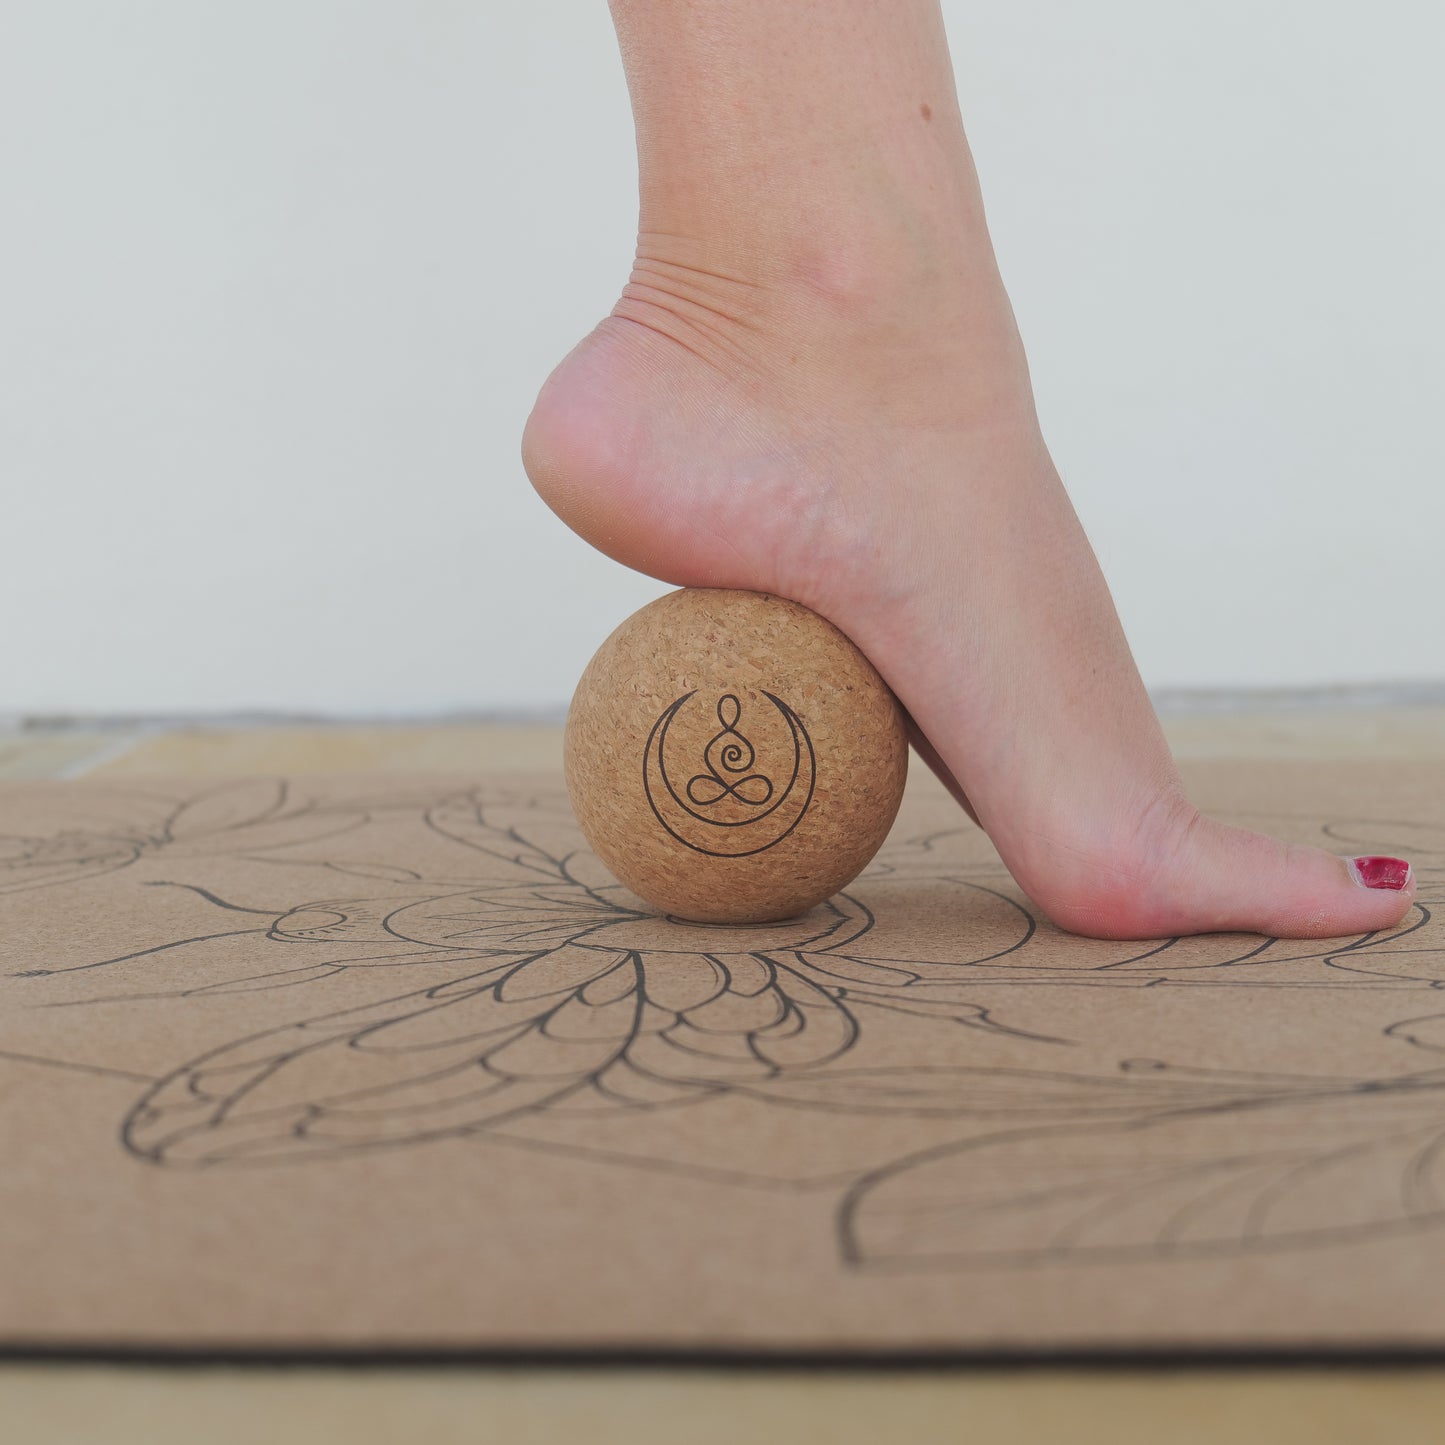 Woman using cork massage balls with OGI NEST logo for sole of foot.